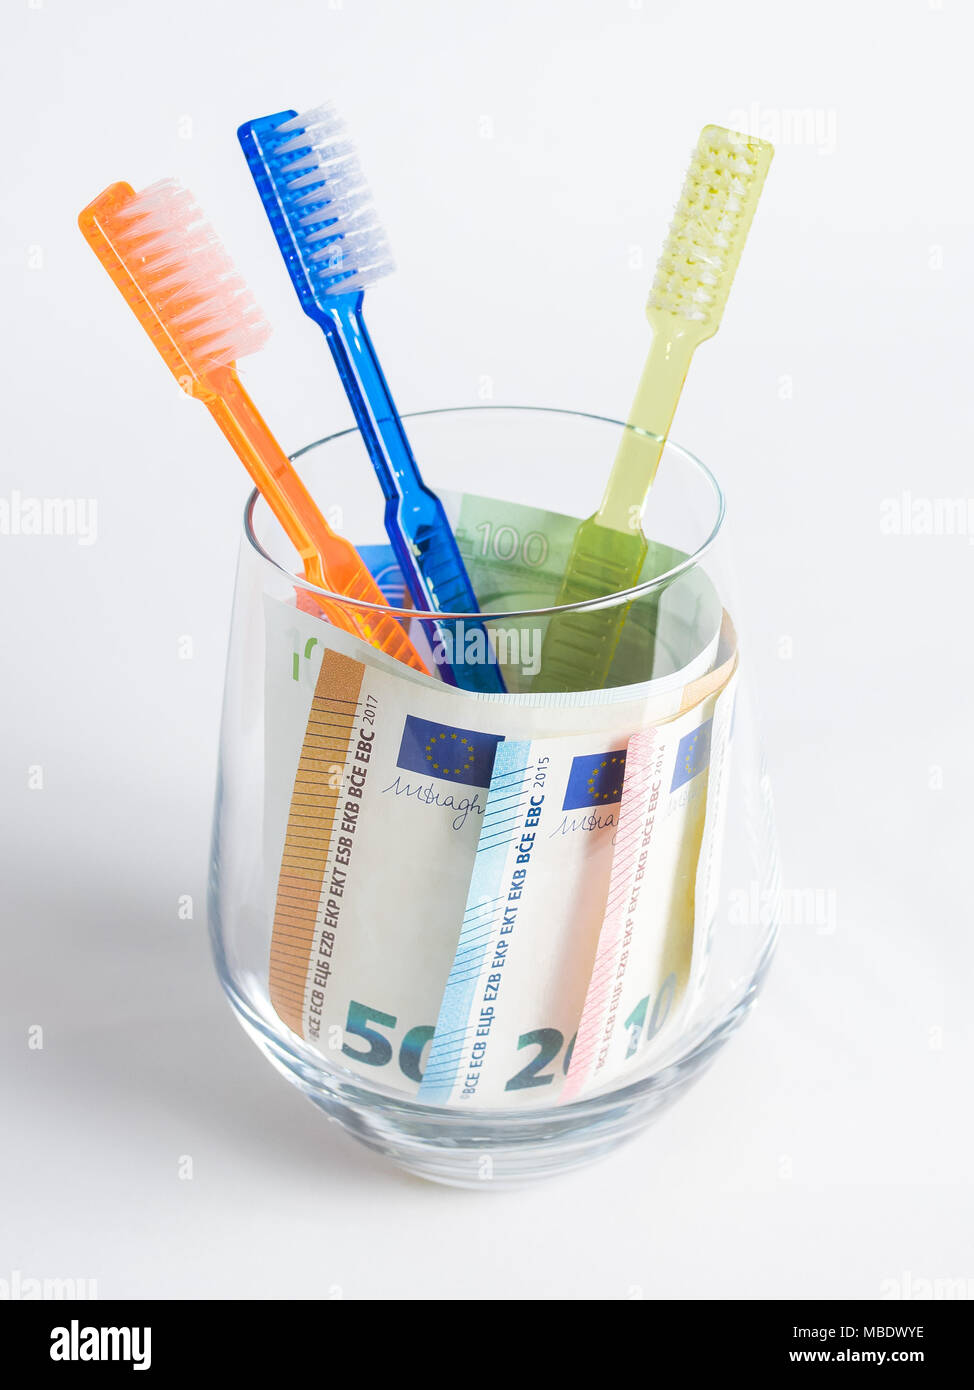 Toothbrushes in glass with money in euros in glass Stock Photo